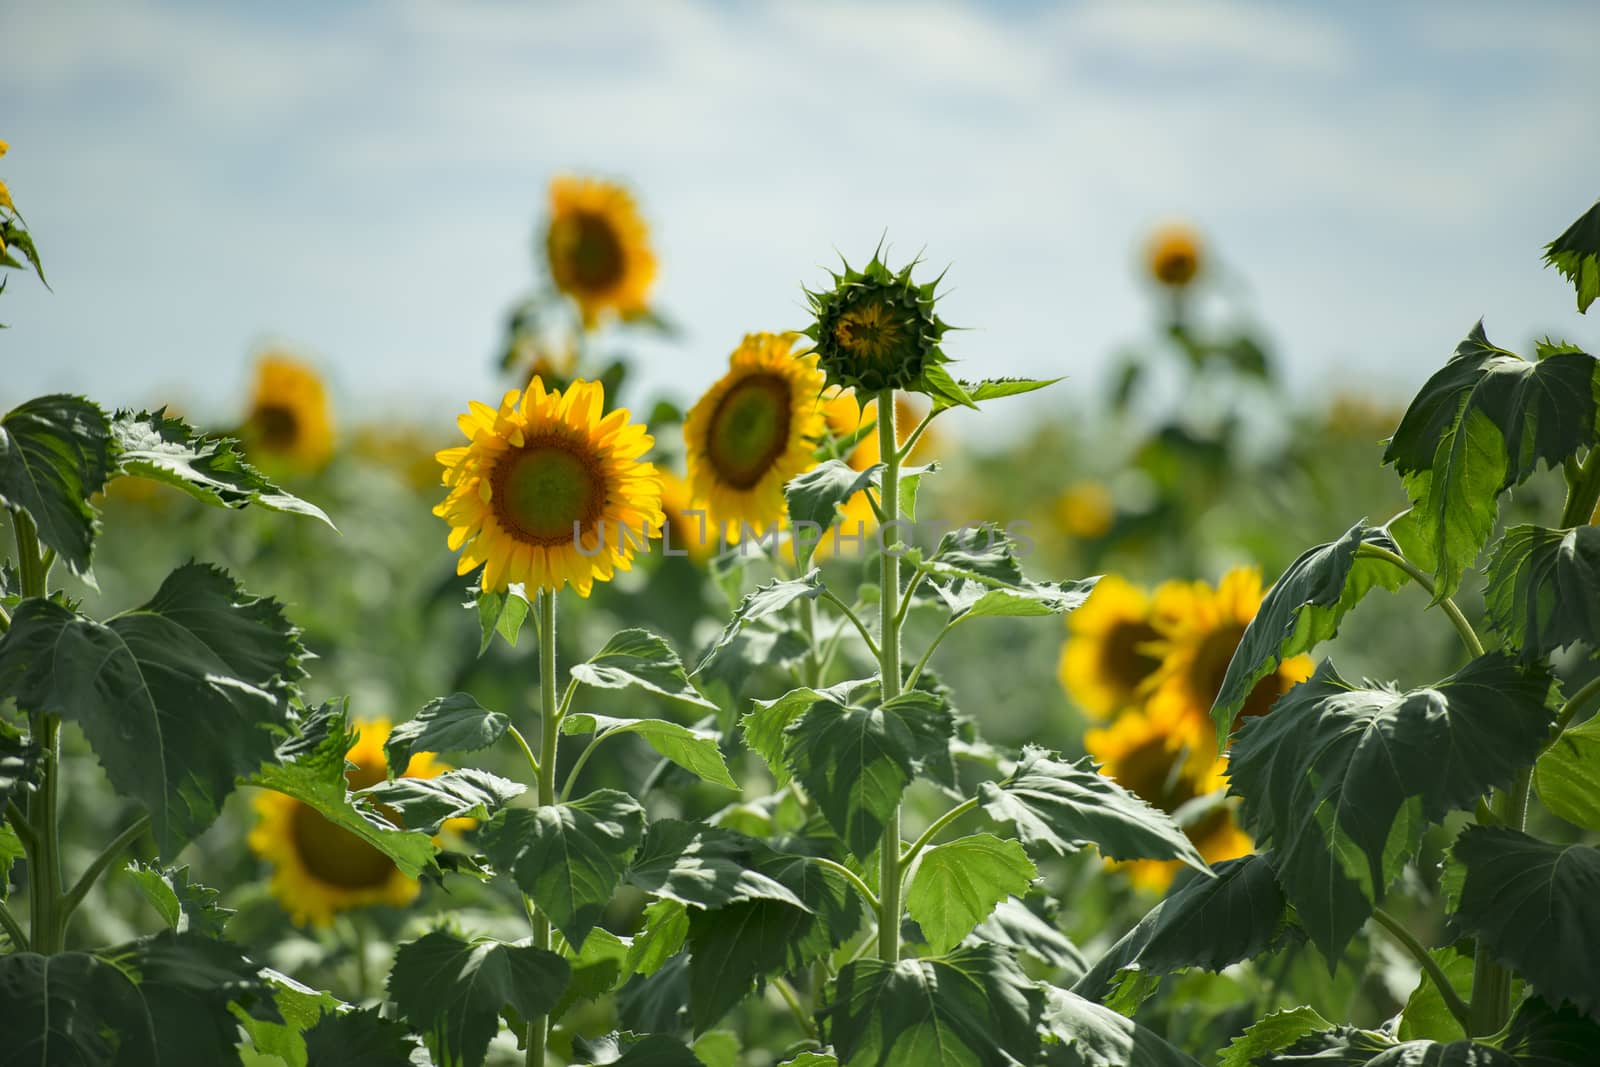 Sunflowers in a field in the afternoon. by artistrobd